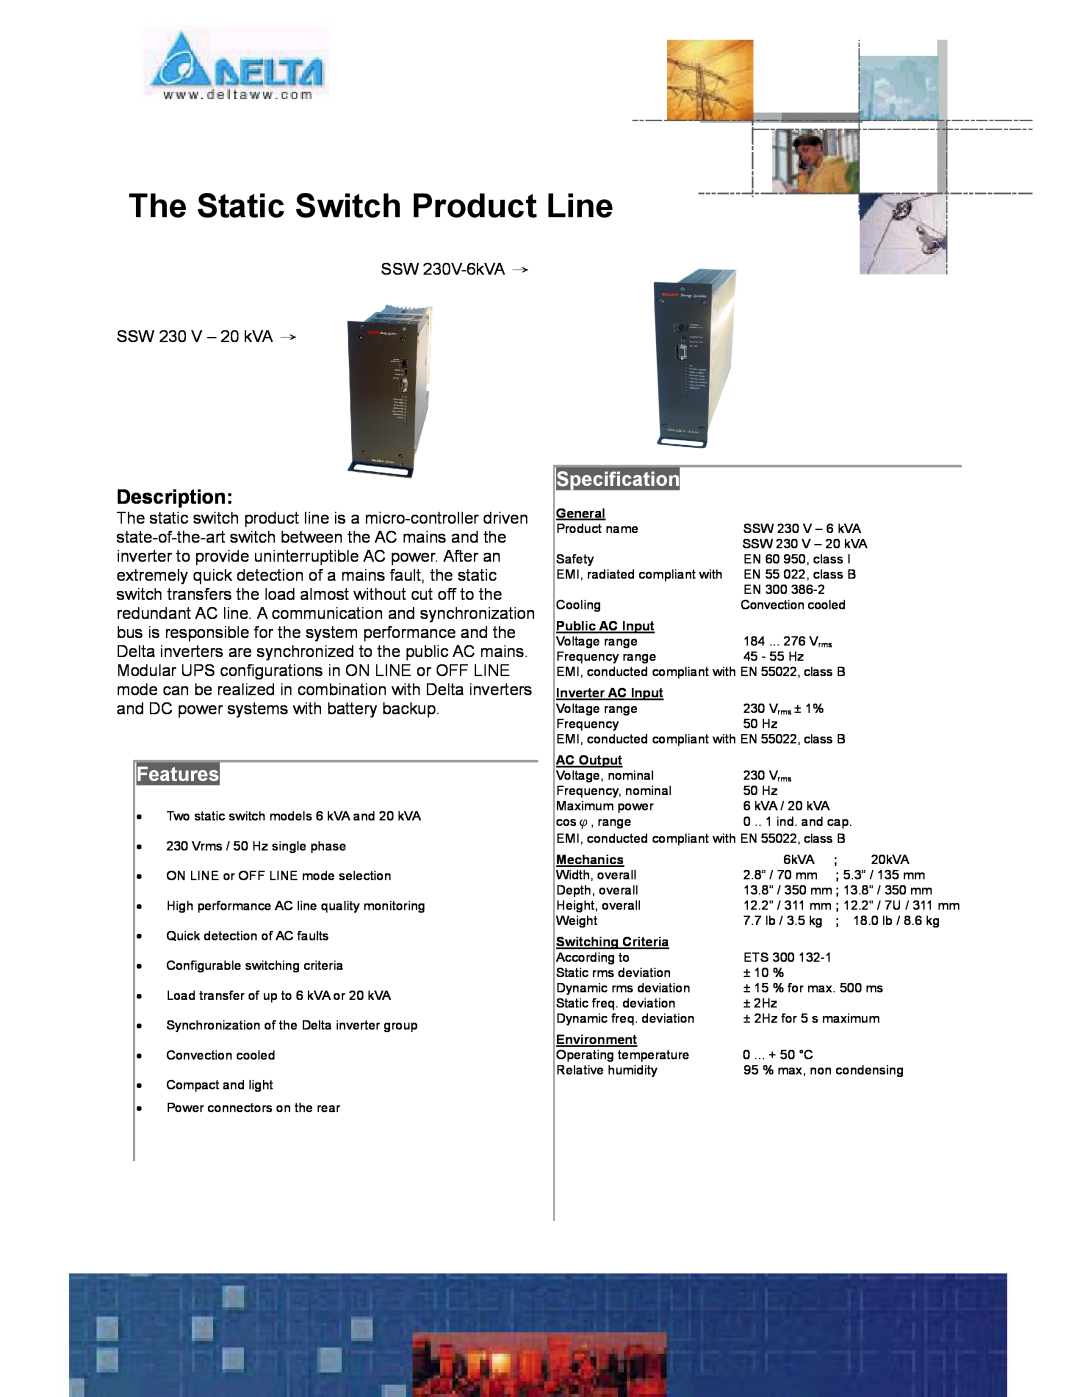 Delta Electronics SSW 230 V - 20 kVA manual The Static Switch Product Line, Description, Features, Specification, General 